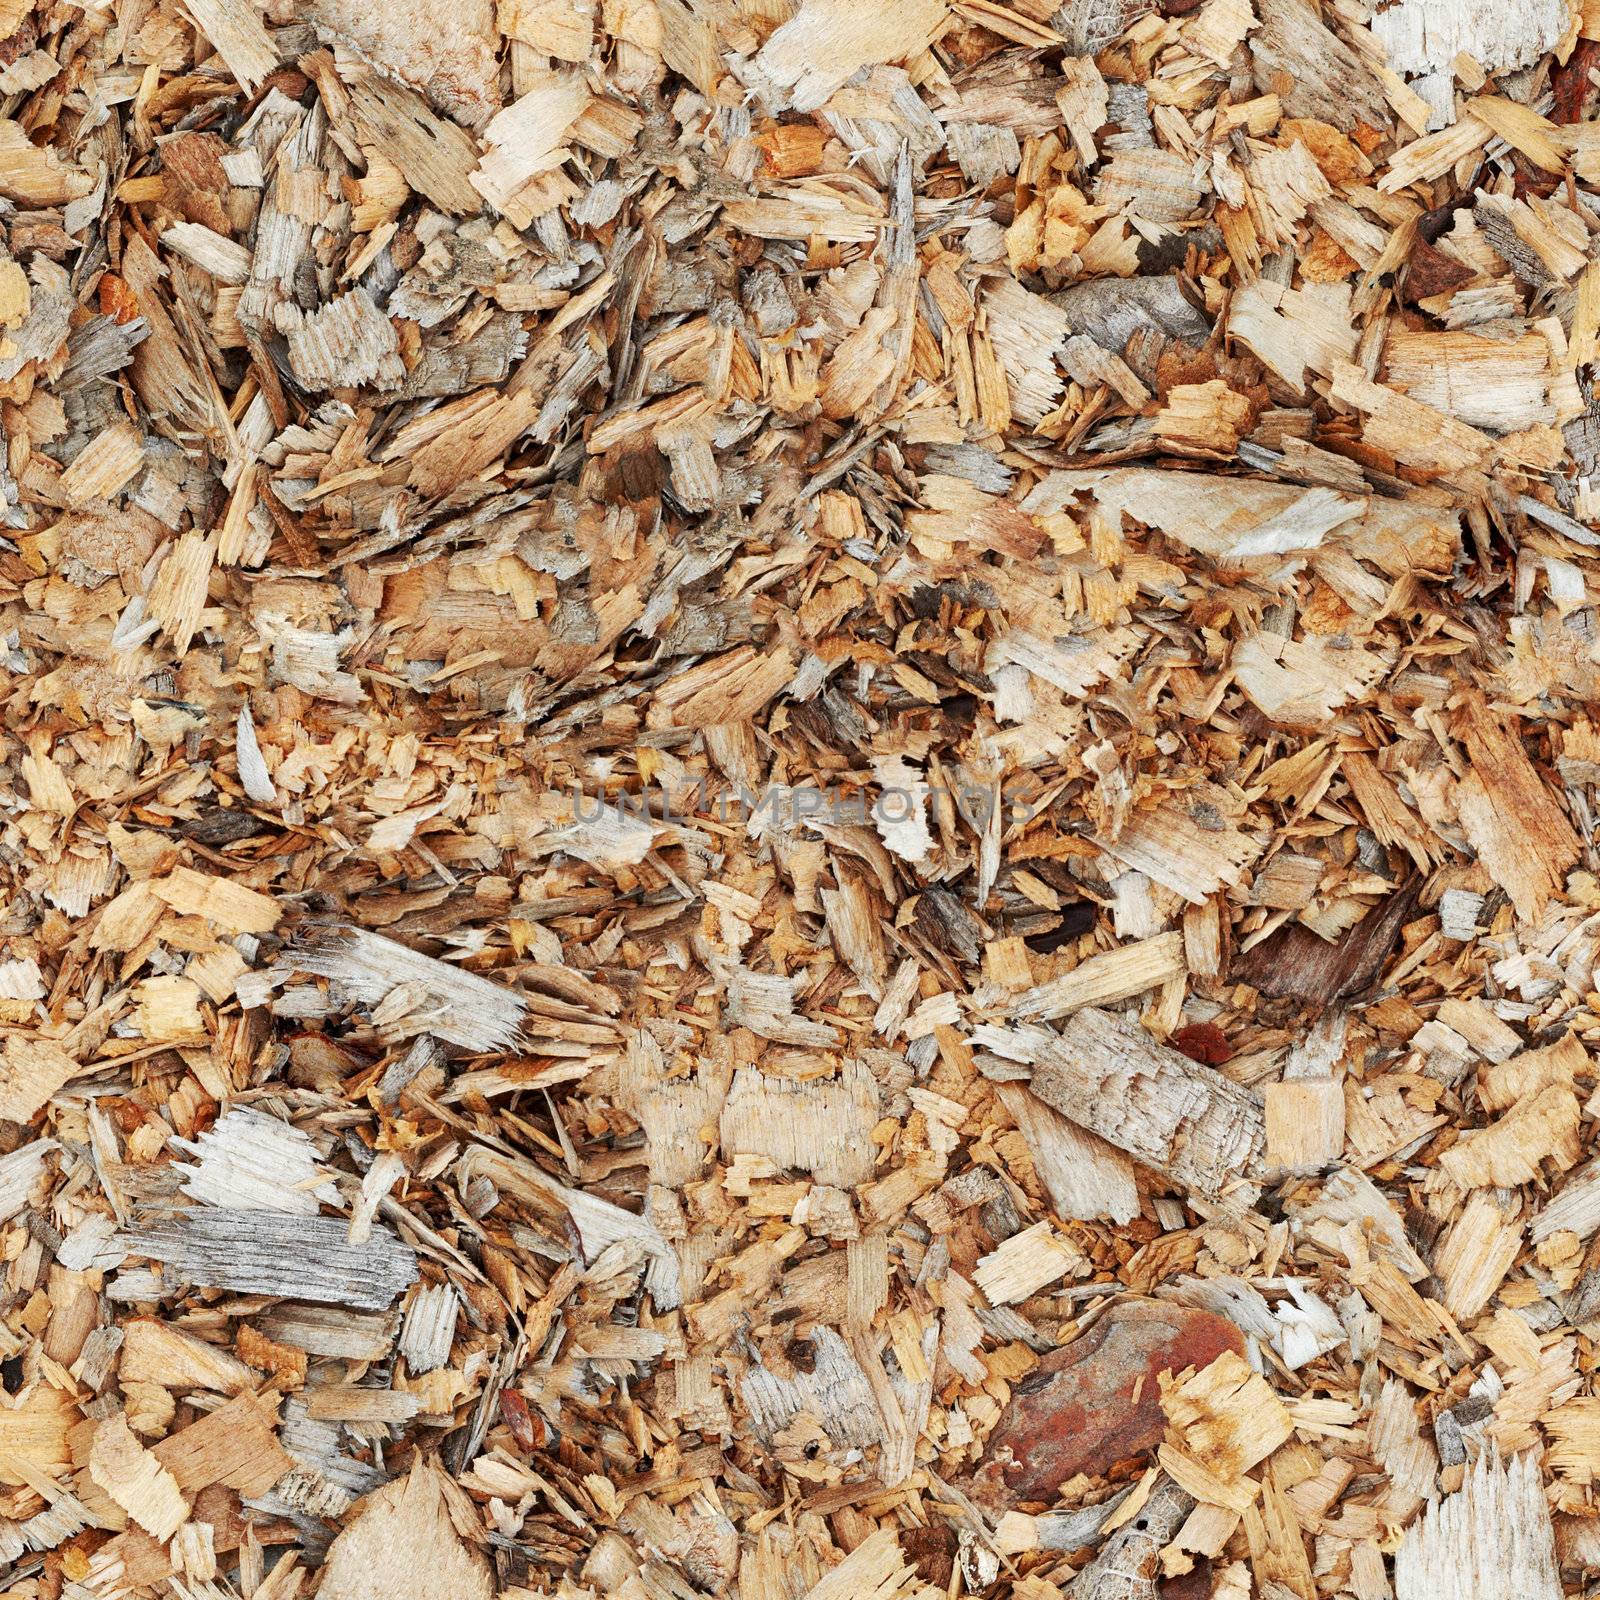 Wood shavings - seamless texture by pzaxe